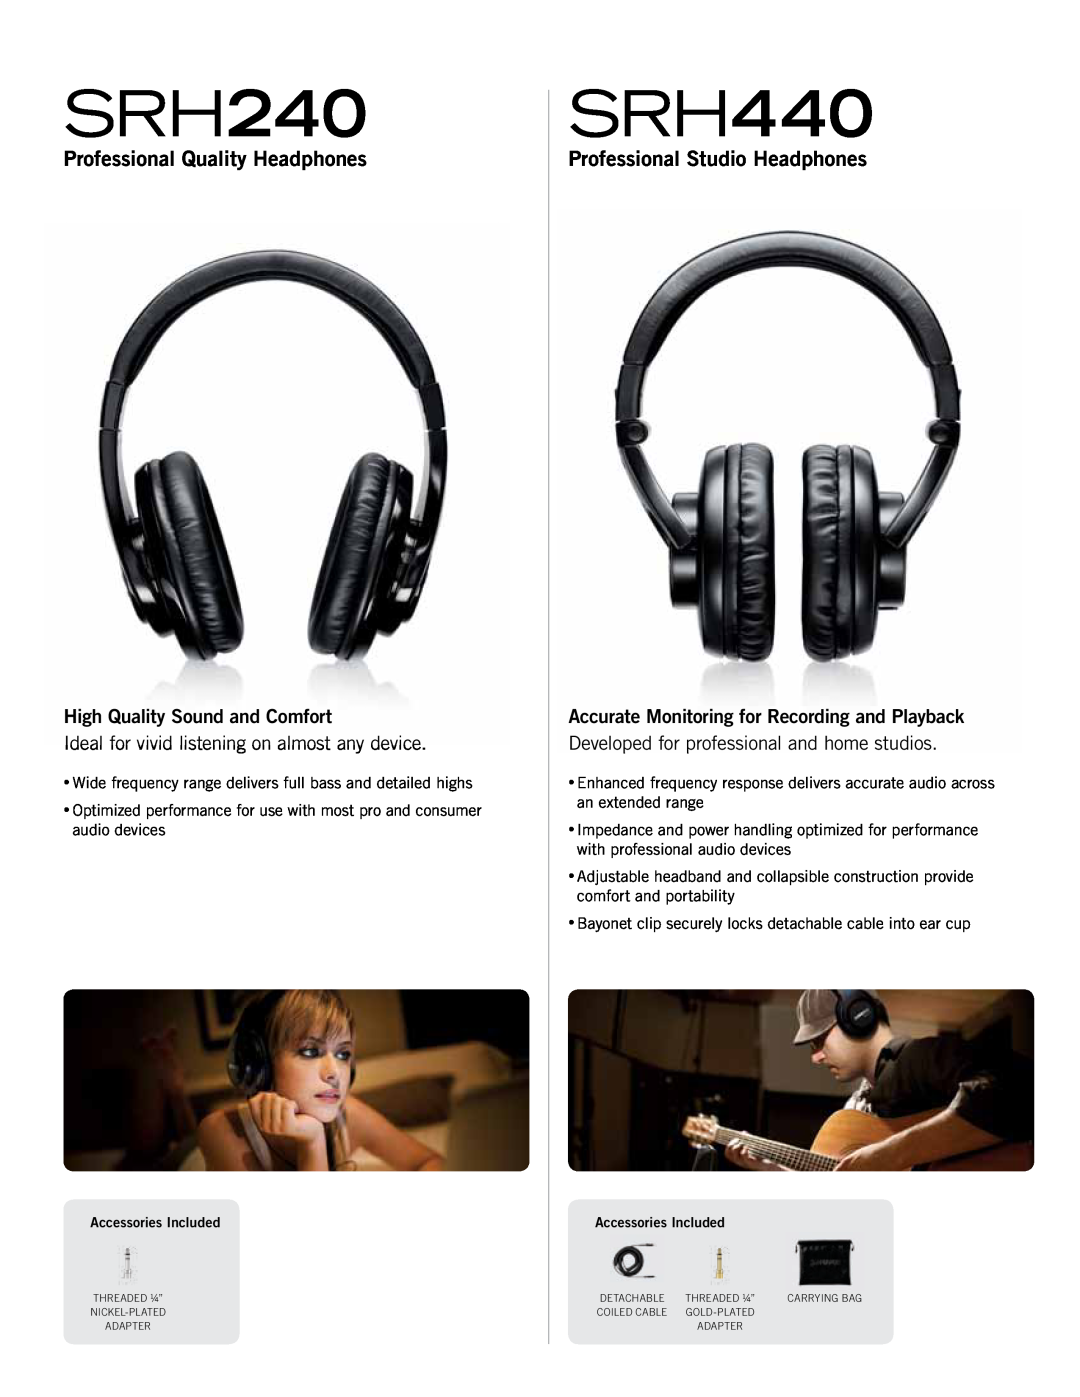 Shure SRH440 SRH240 manual Professional Quality Headphones, Professional Studio Headphones, High Quality Sound and Comfort 